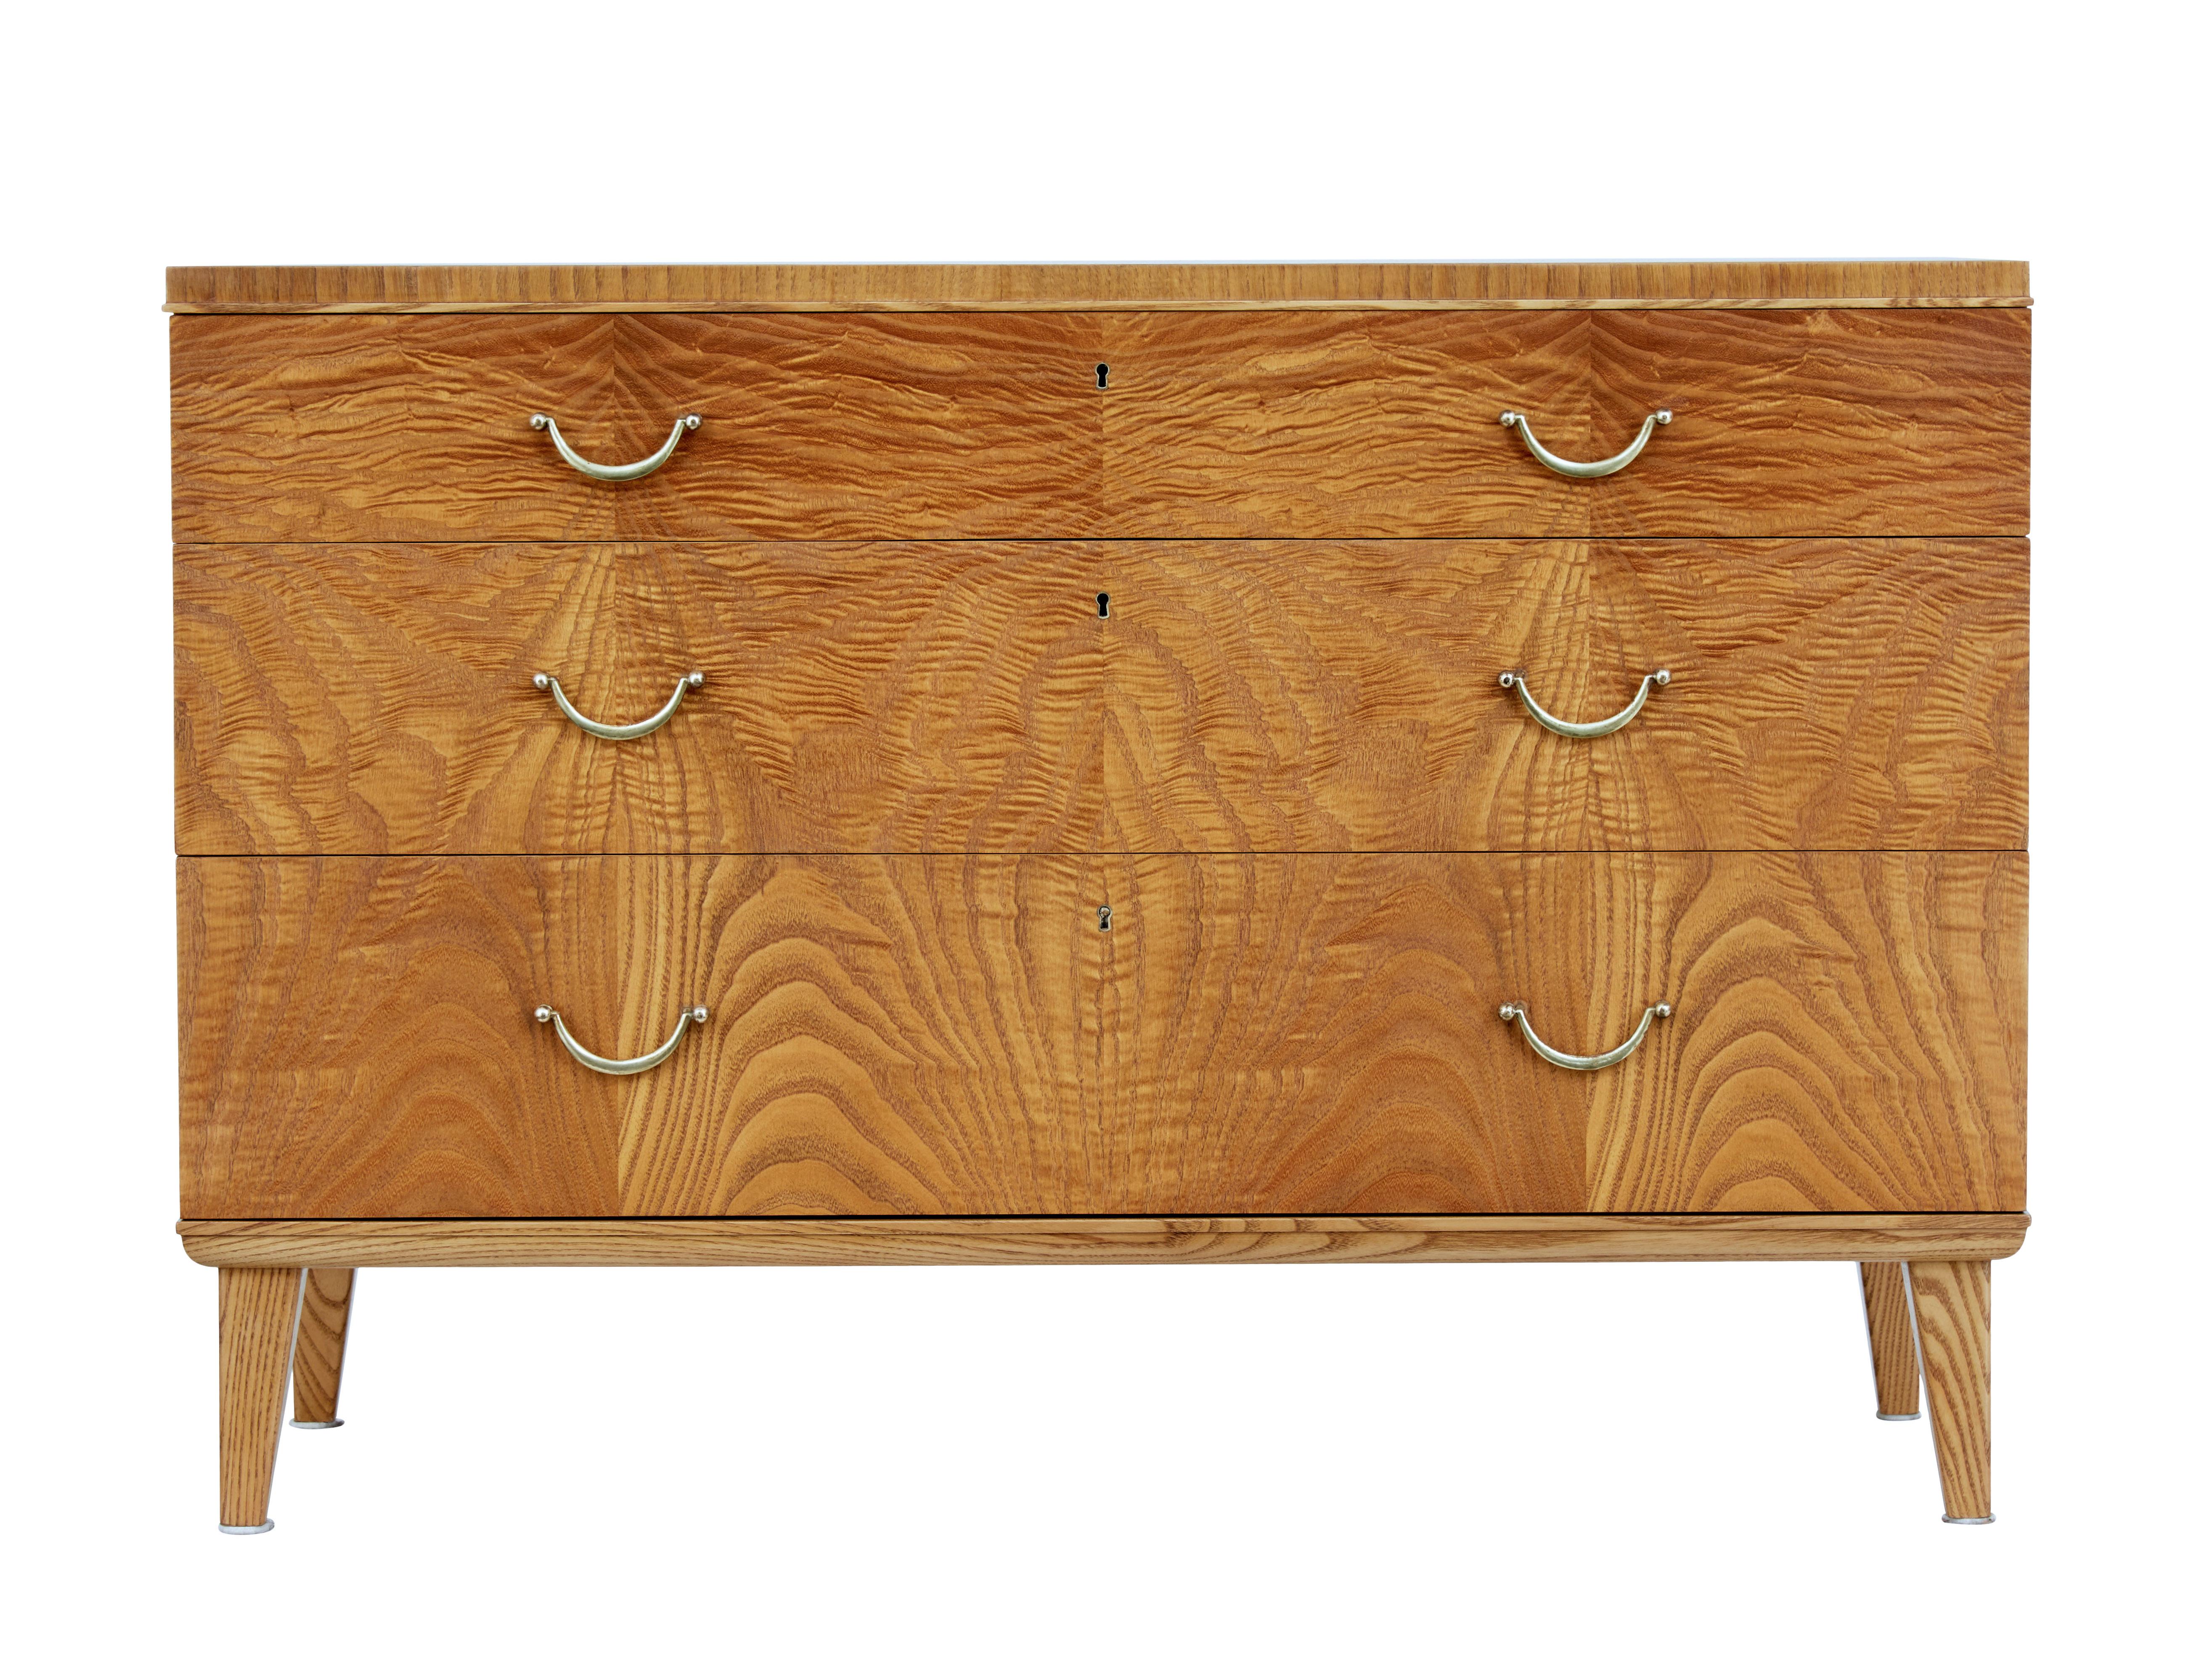 Mid-20th century elm chest of drawers by smf Bodafors circa 1940.

Stunning chest of drawers produced by Swedish company Bodafors.

3 graduating drawers veneered in striking matched elm veneers which flow down through the drawers, each fitted